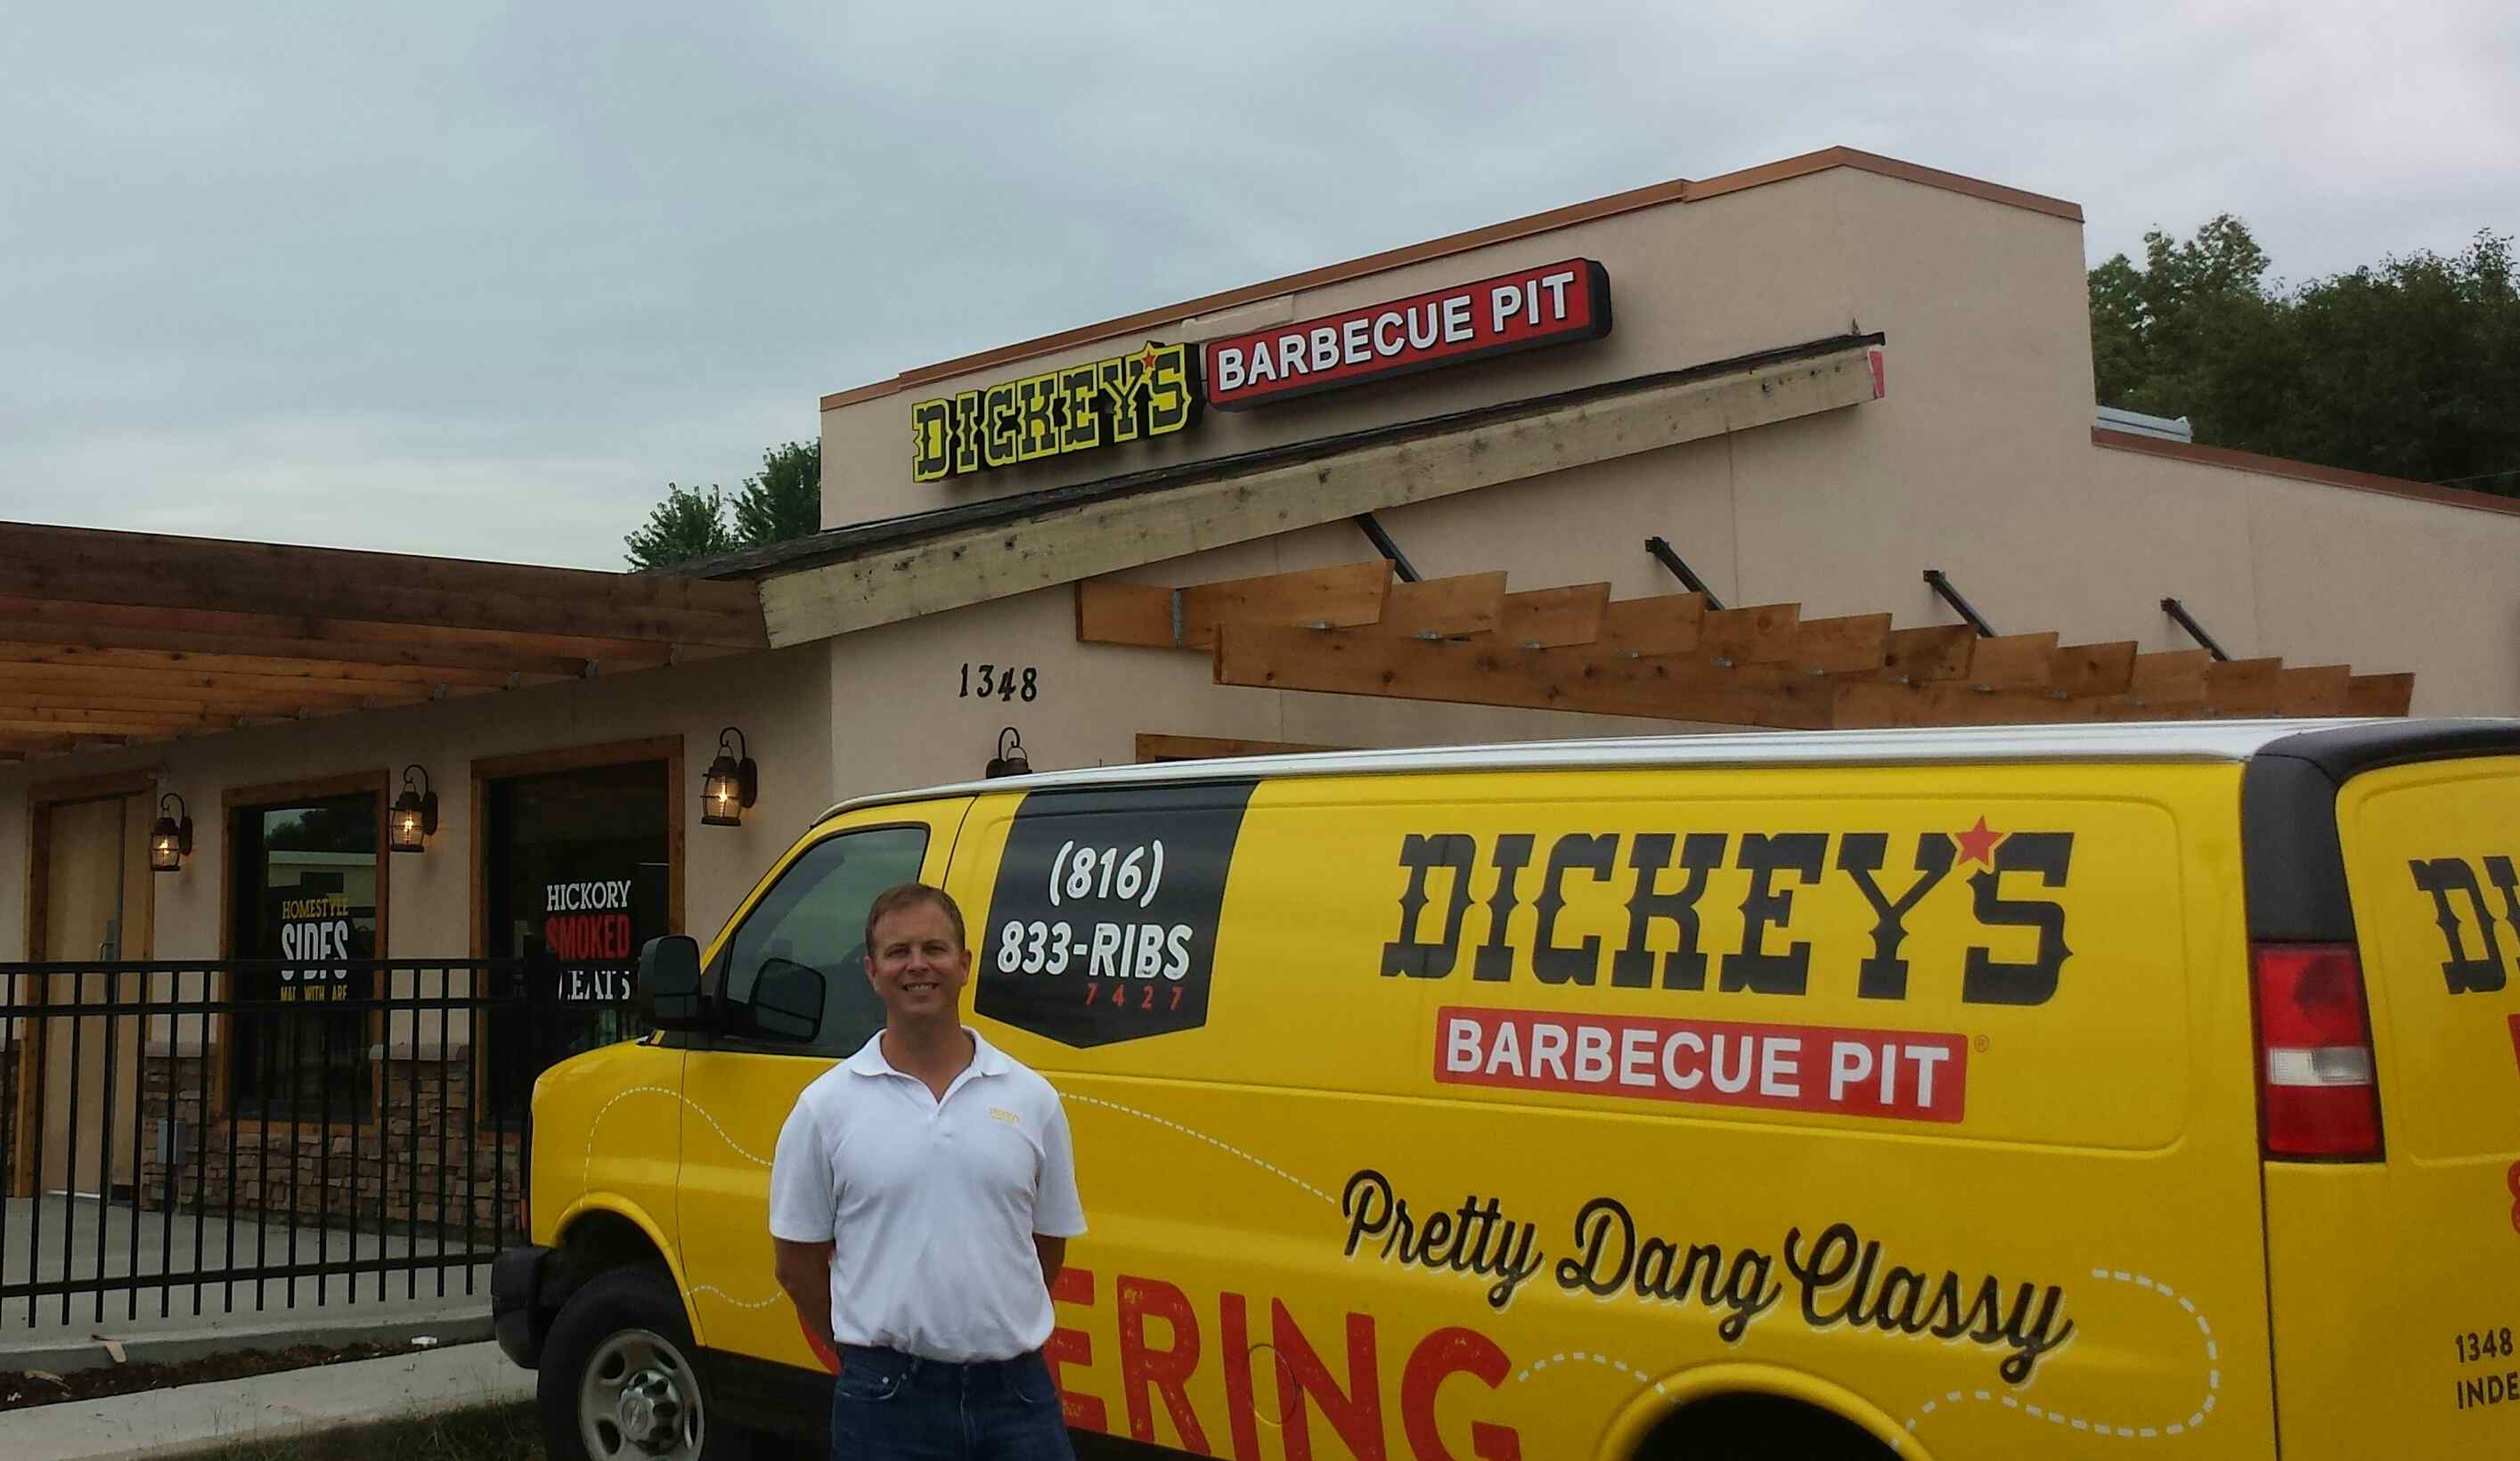 Servin’ Up Some Texas-Style Barbecue: Dickey’s Barbecue Pit opens new location in Wichita, KS